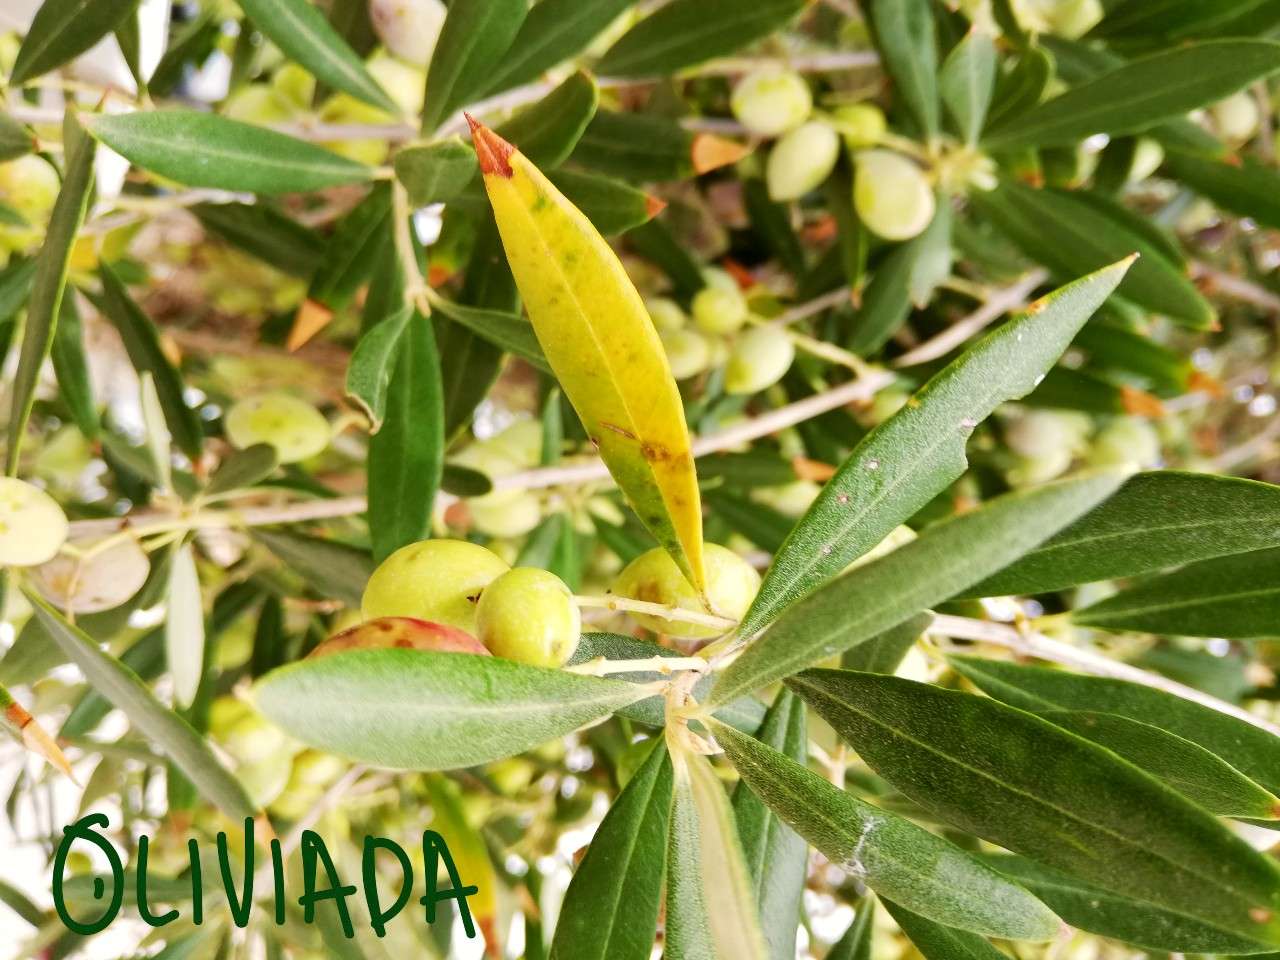 olive tree leaves turning yellow if not well fed or overwatered